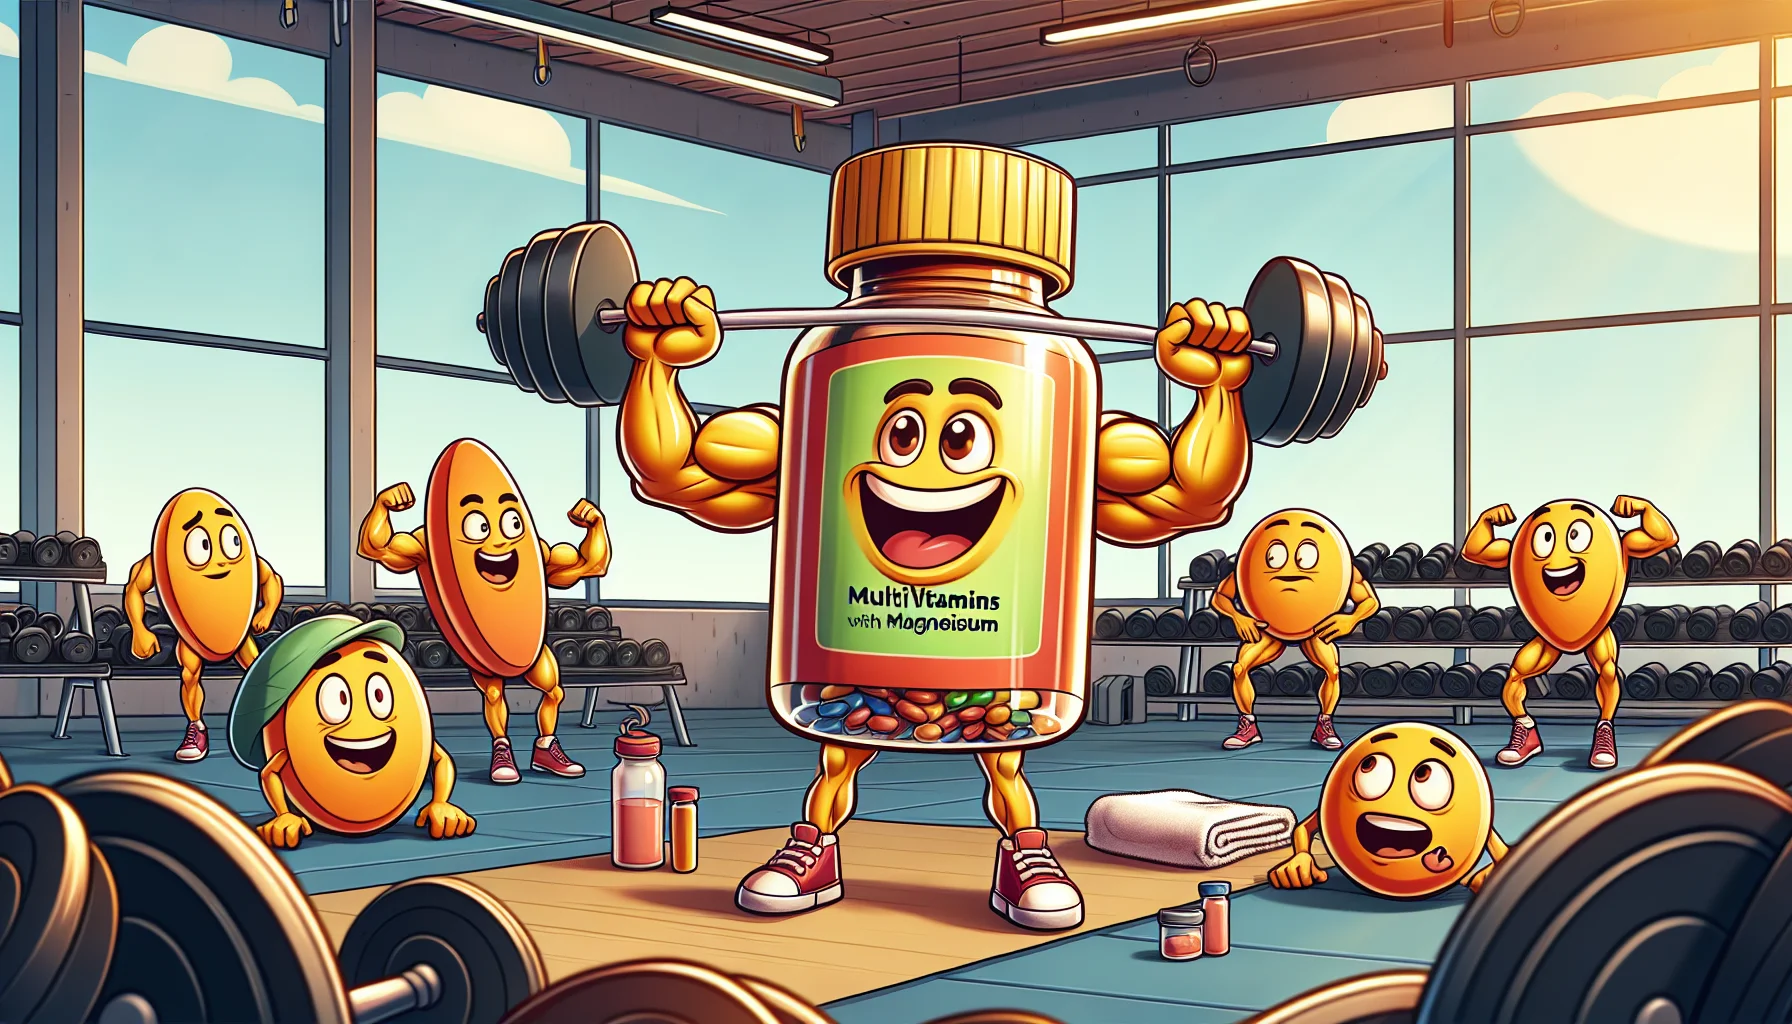 Create a comic-like, realistic image that presents multivitamins with magnesium in an amusing scenario. Imagine the vitamins are personified, having cheerful expressions and muscular arms, as if they have benefitted from sports training. They are in a gym setting pulling weights while encouraging onlookers around them. The onlookers could be stylized as everyday items like a bottle of water, a towel, or a protein bar, displaying expressions of surprise and admiration. An environment filled with popular gym equipment, a bright color scheme, and wholehearted laughter coming from the multivitamins should make the scene both amusing and inviting.